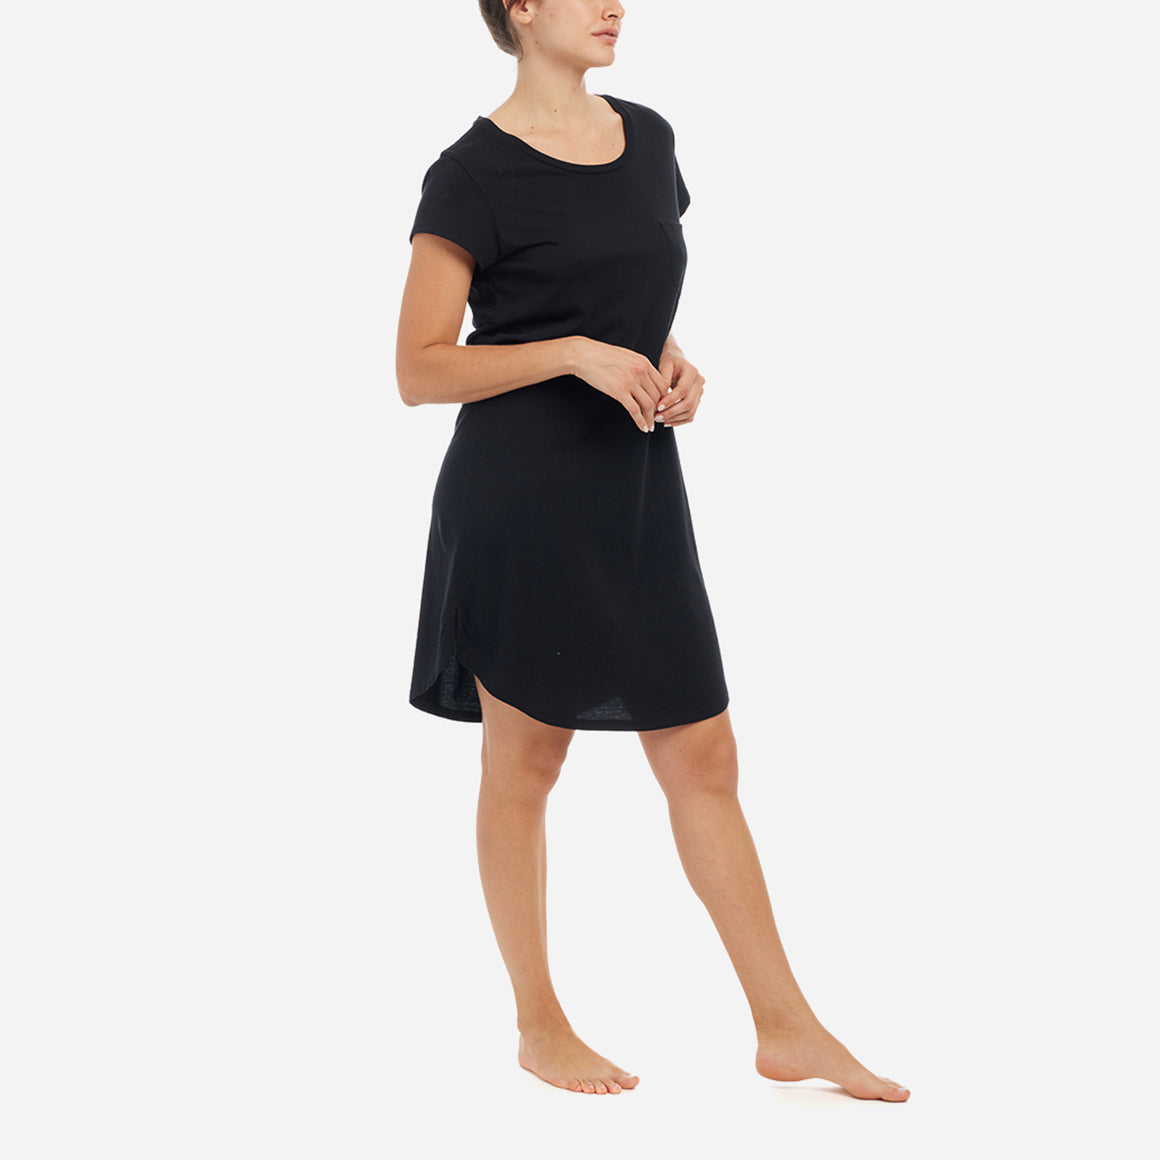 The Carissa Sleep Shirt features a classic silhouette with a modern twist. Its relaxed fit allows for ease of movement, while the tailored details and delicate trim add a touch of sophistication to your sleepwear. The longer knee-length provides coverage and comfort, making it an ideal choice for lounging around the house in style.